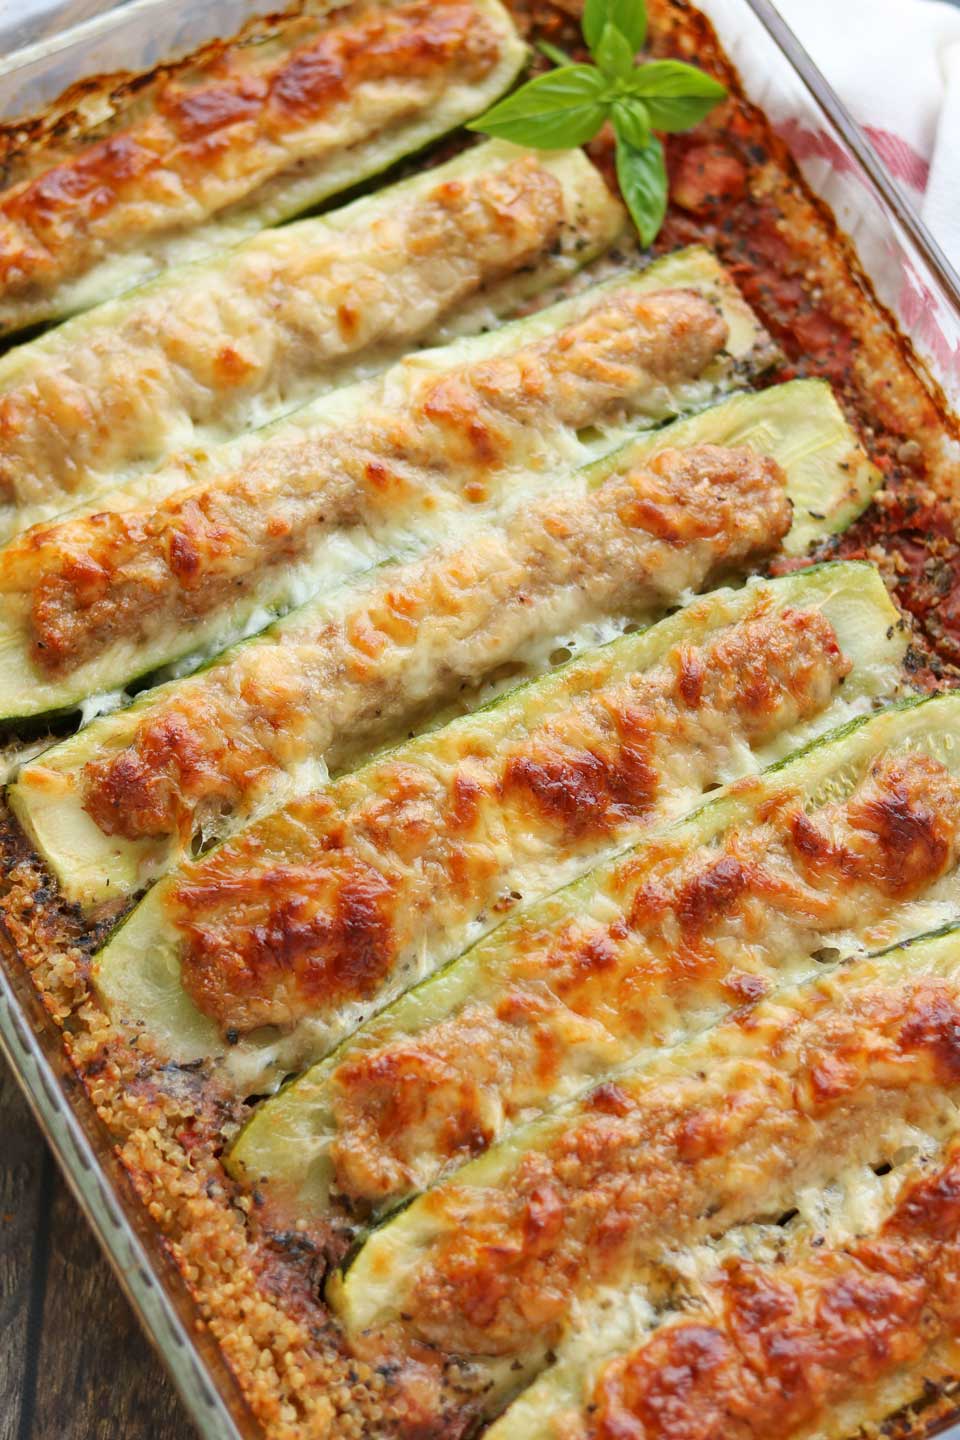 A one-pot wonder, for sure! This delicious sausage-filled Stuffed Zucchini Boats recipe includes a bed of quinoa that you mix up right in the pan, before layering on the stuffed zucchinis and sprinkling on the blend of Italian cheeses. Plus, this zucchini casserole can be entirely prepped ahead, making hectic dinnertime a whole lot easier!